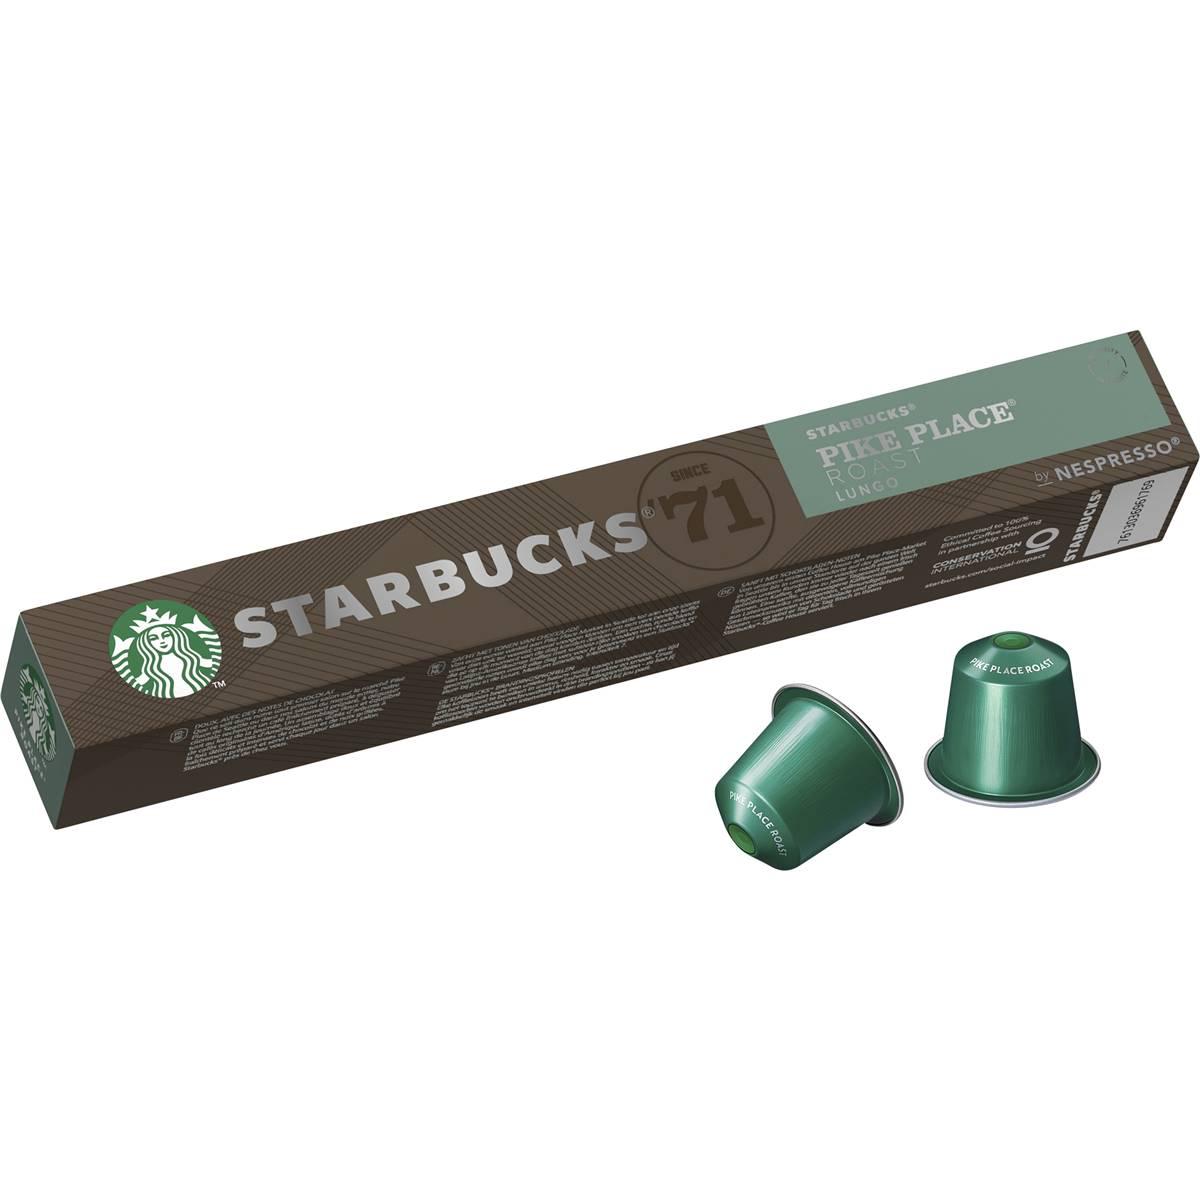 Starbucks By Nespresso Pike Place Roast Coffee Pods Capsules 10 Pack